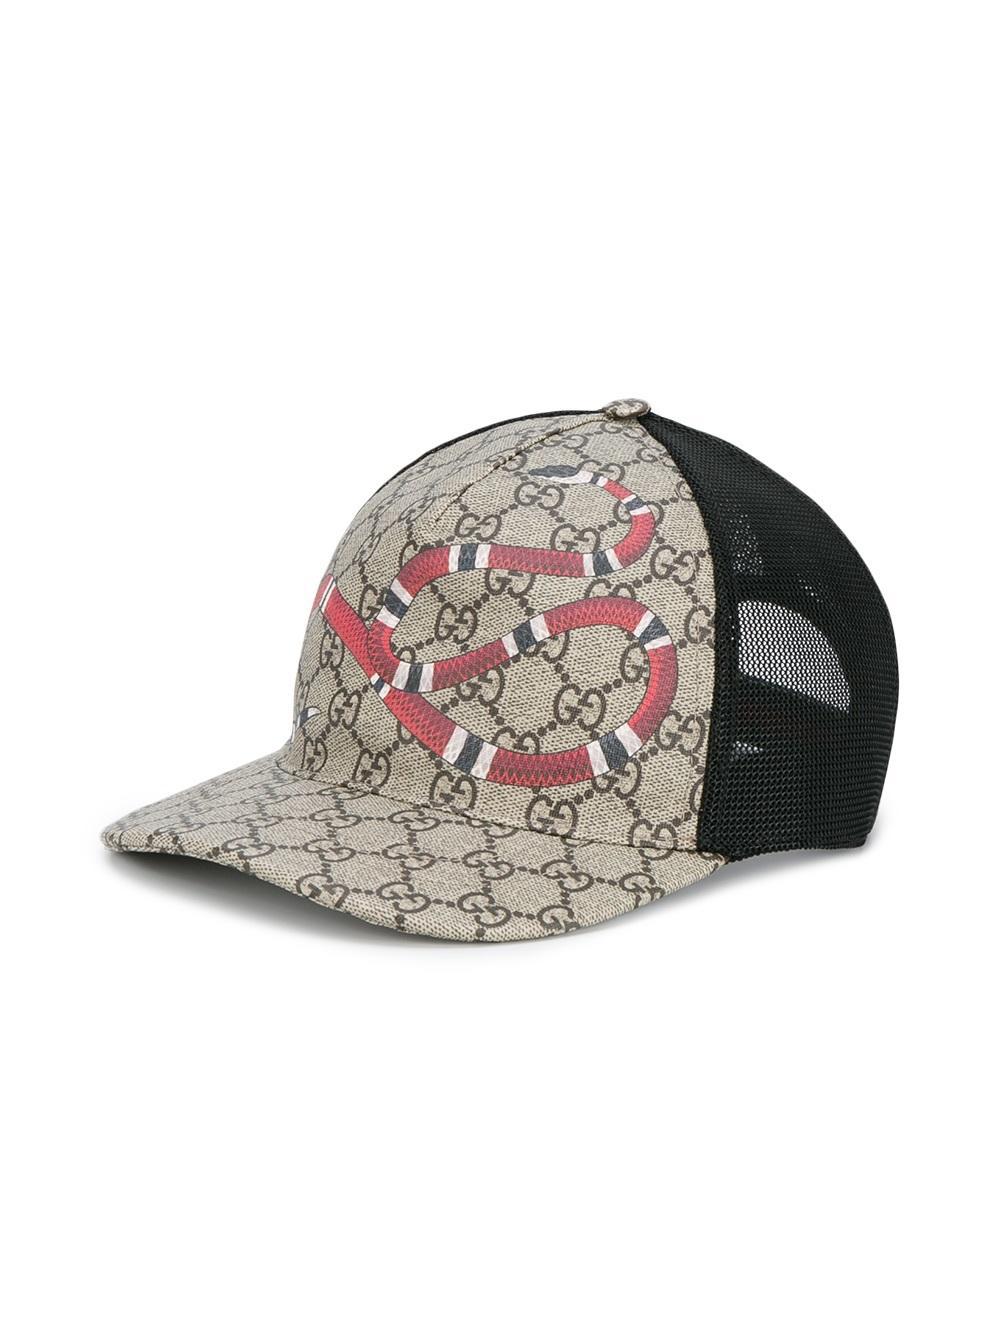 Gucci Synthetic Snake Print Gg Supreme Baseball Cap in Brown for Men - Lyst